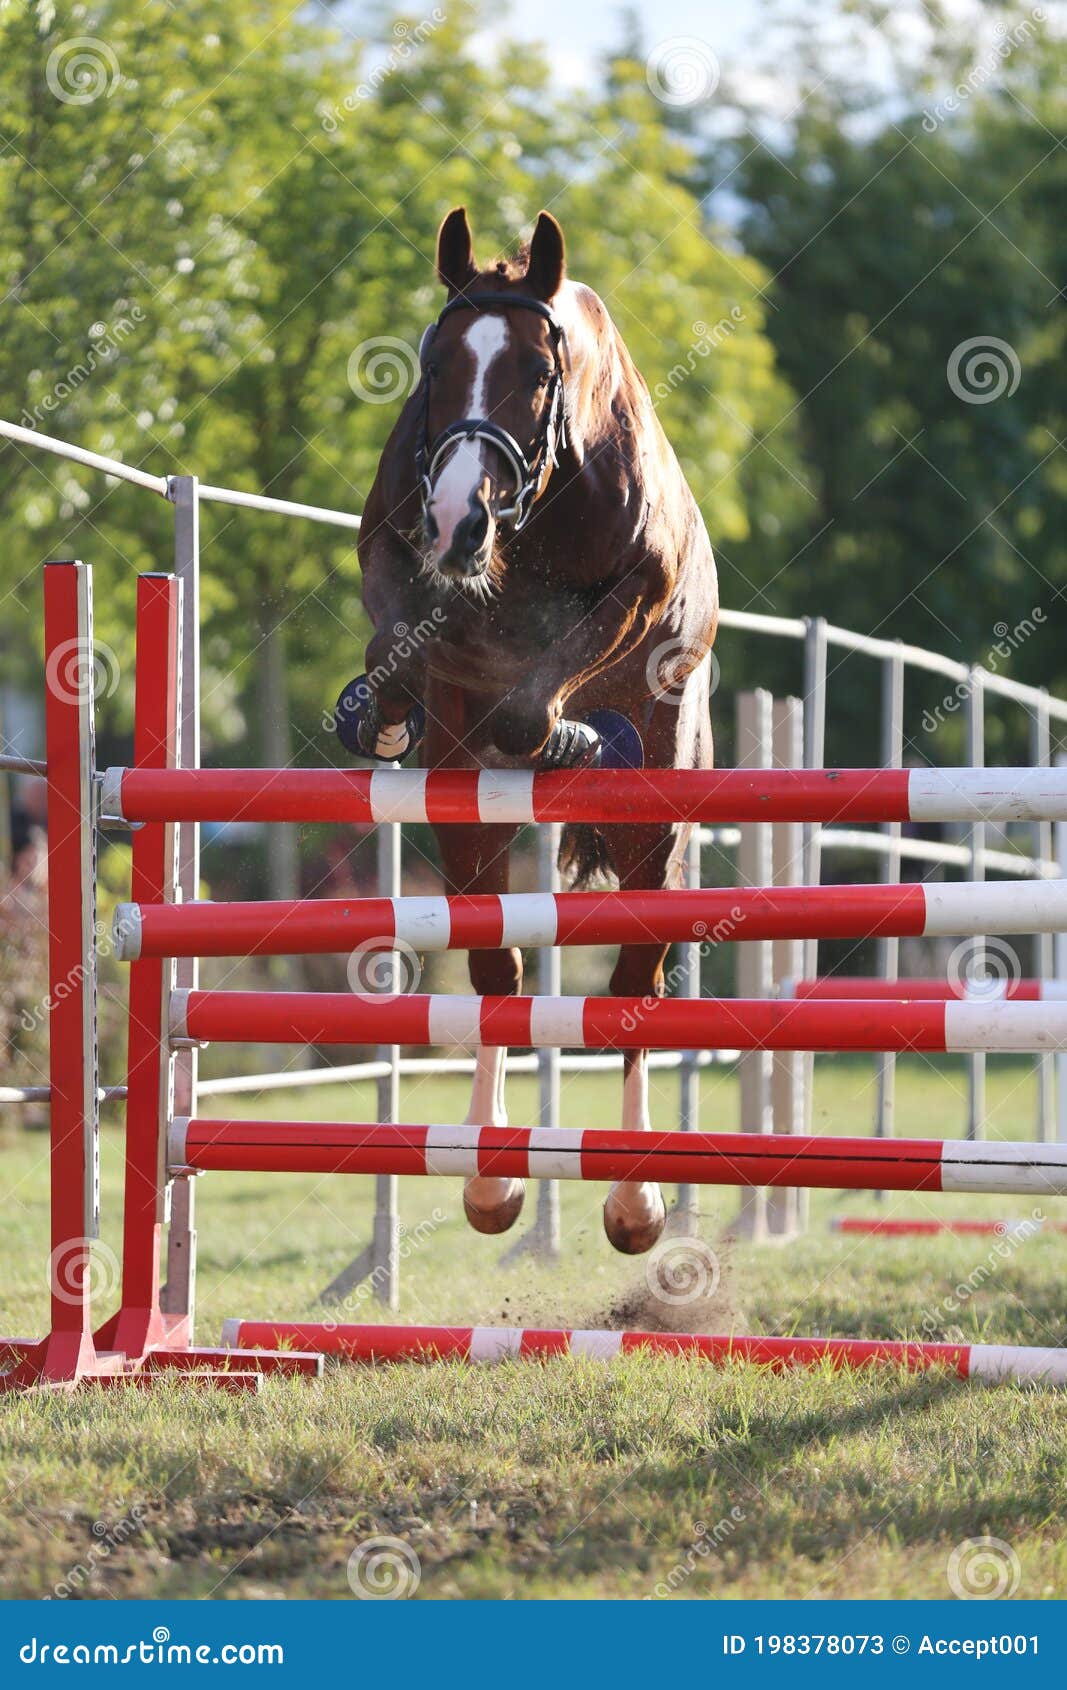 horse loose jumping on breeders event outdoors